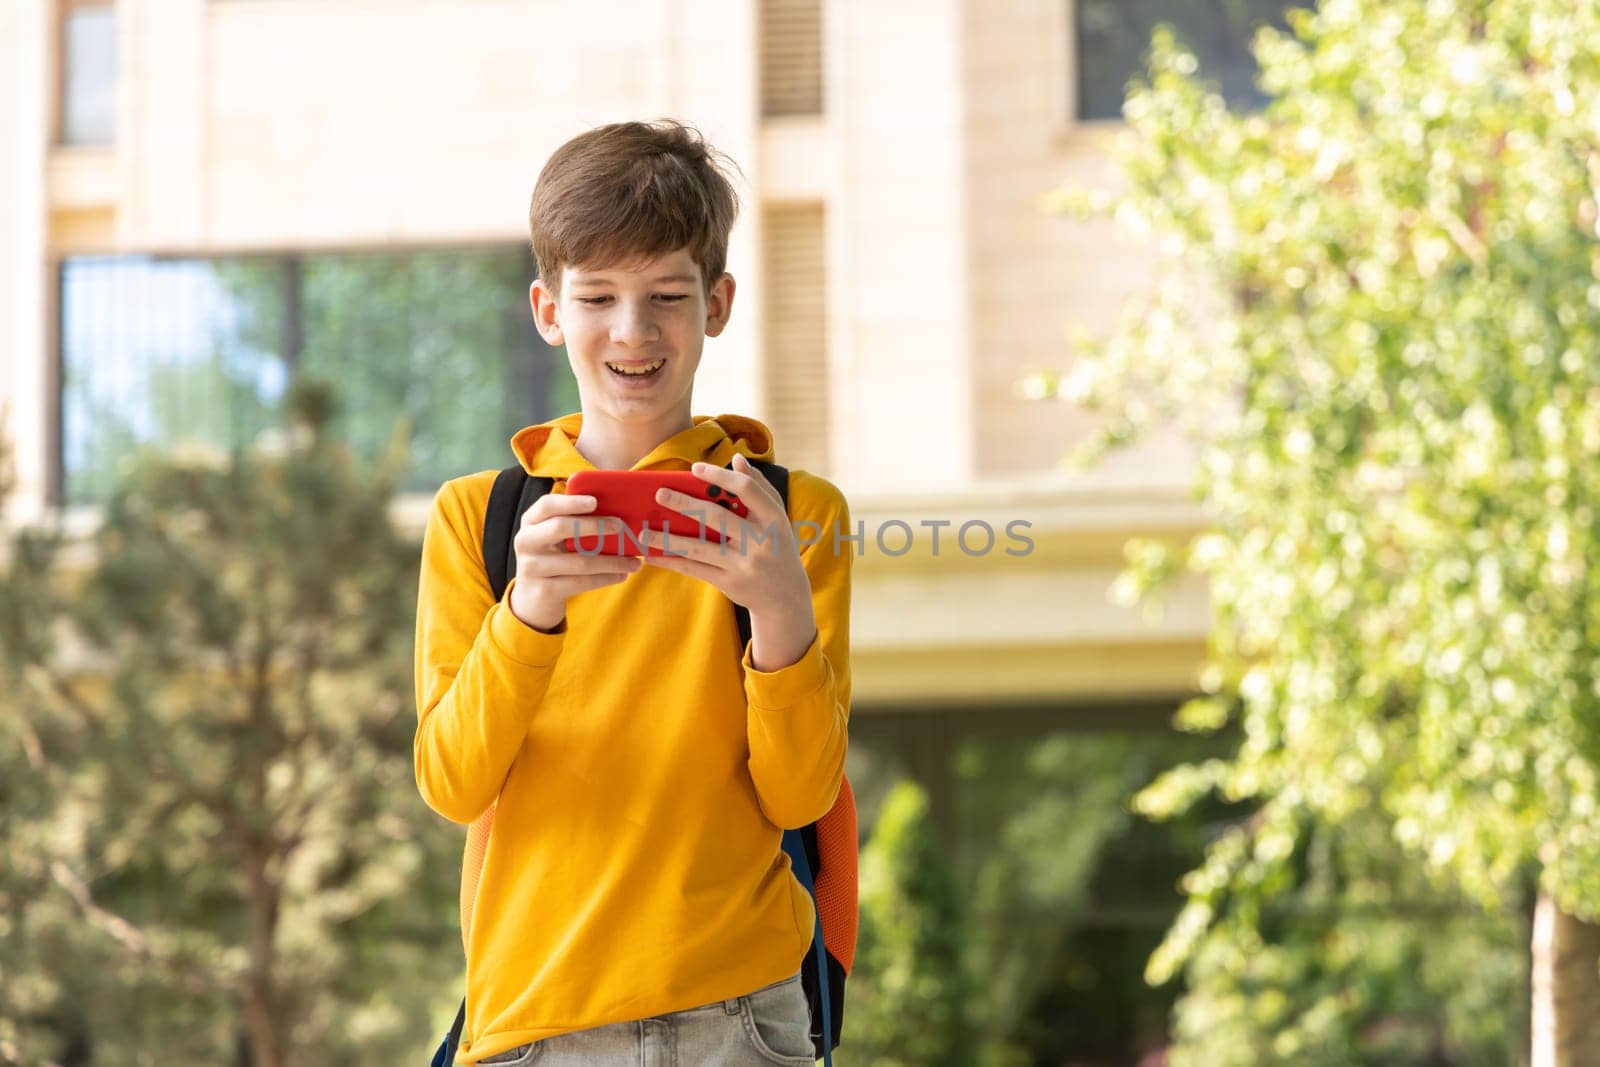 A young boy is having a video call outdoors, holding a smartphone in his hands. by Ri6ka